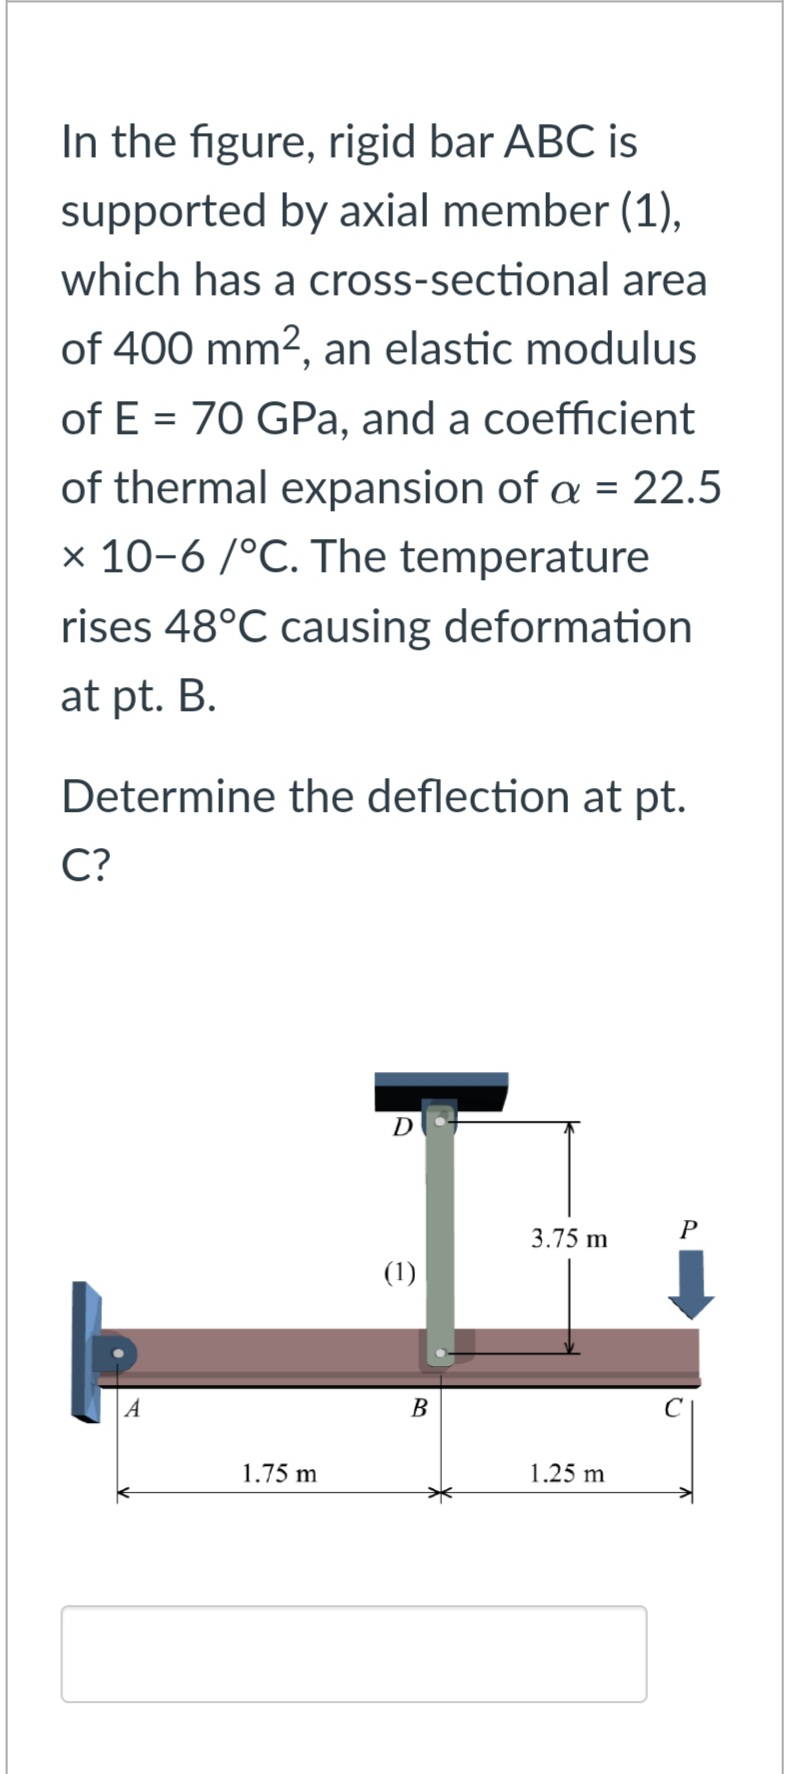 In the figure, rigid bar ABC is
supported by axial member (1),
which has a cross-sectional area
of 400 mm², an elastic modulus
of E = 70 GPa, and a coefficient
of thermal expansion of a = 22.5
x 10-6/°C. The temperature
rises 48°C causing deformation
at pt. B.
Determine the deflection at pt.
C?
A
1.75 m
D
(1)
B
3.75 m
1.25 m
P
U